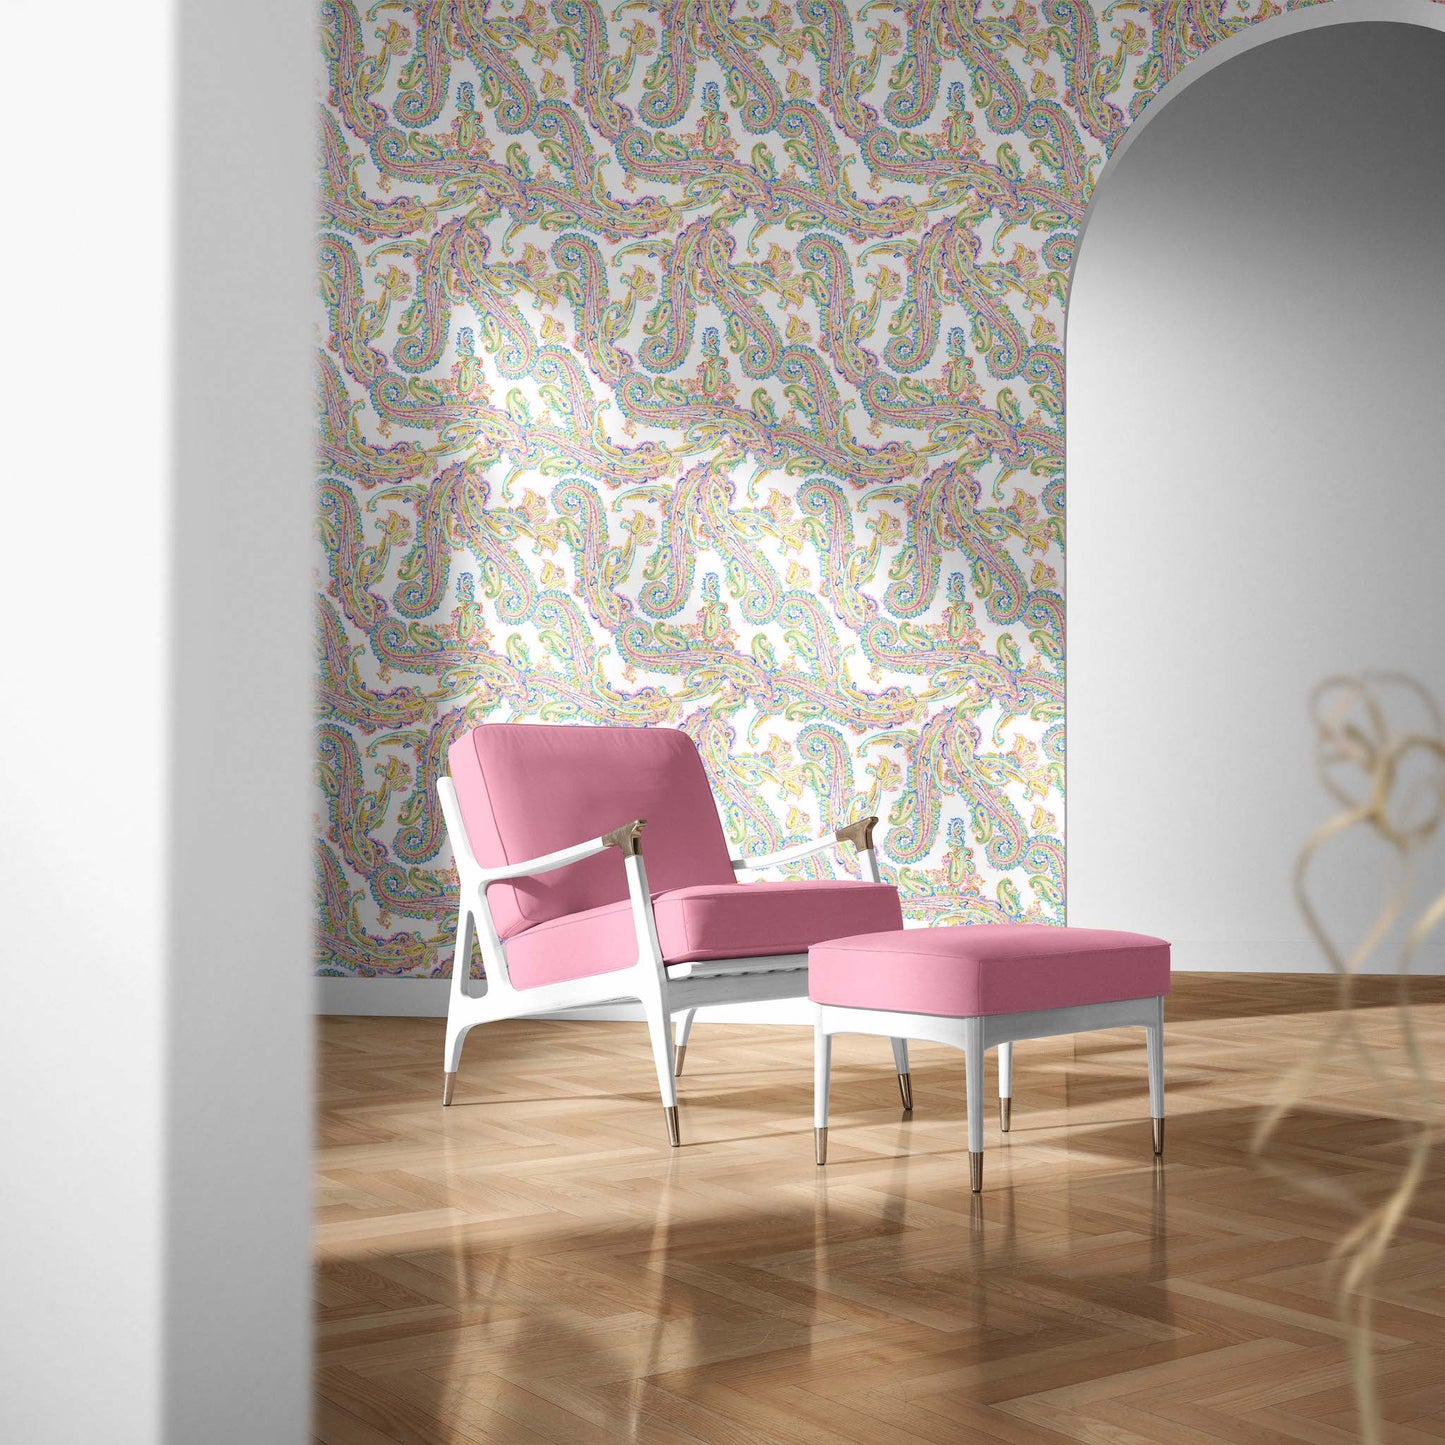 Paisley | Peel and Stick | Fabric Wallpaper